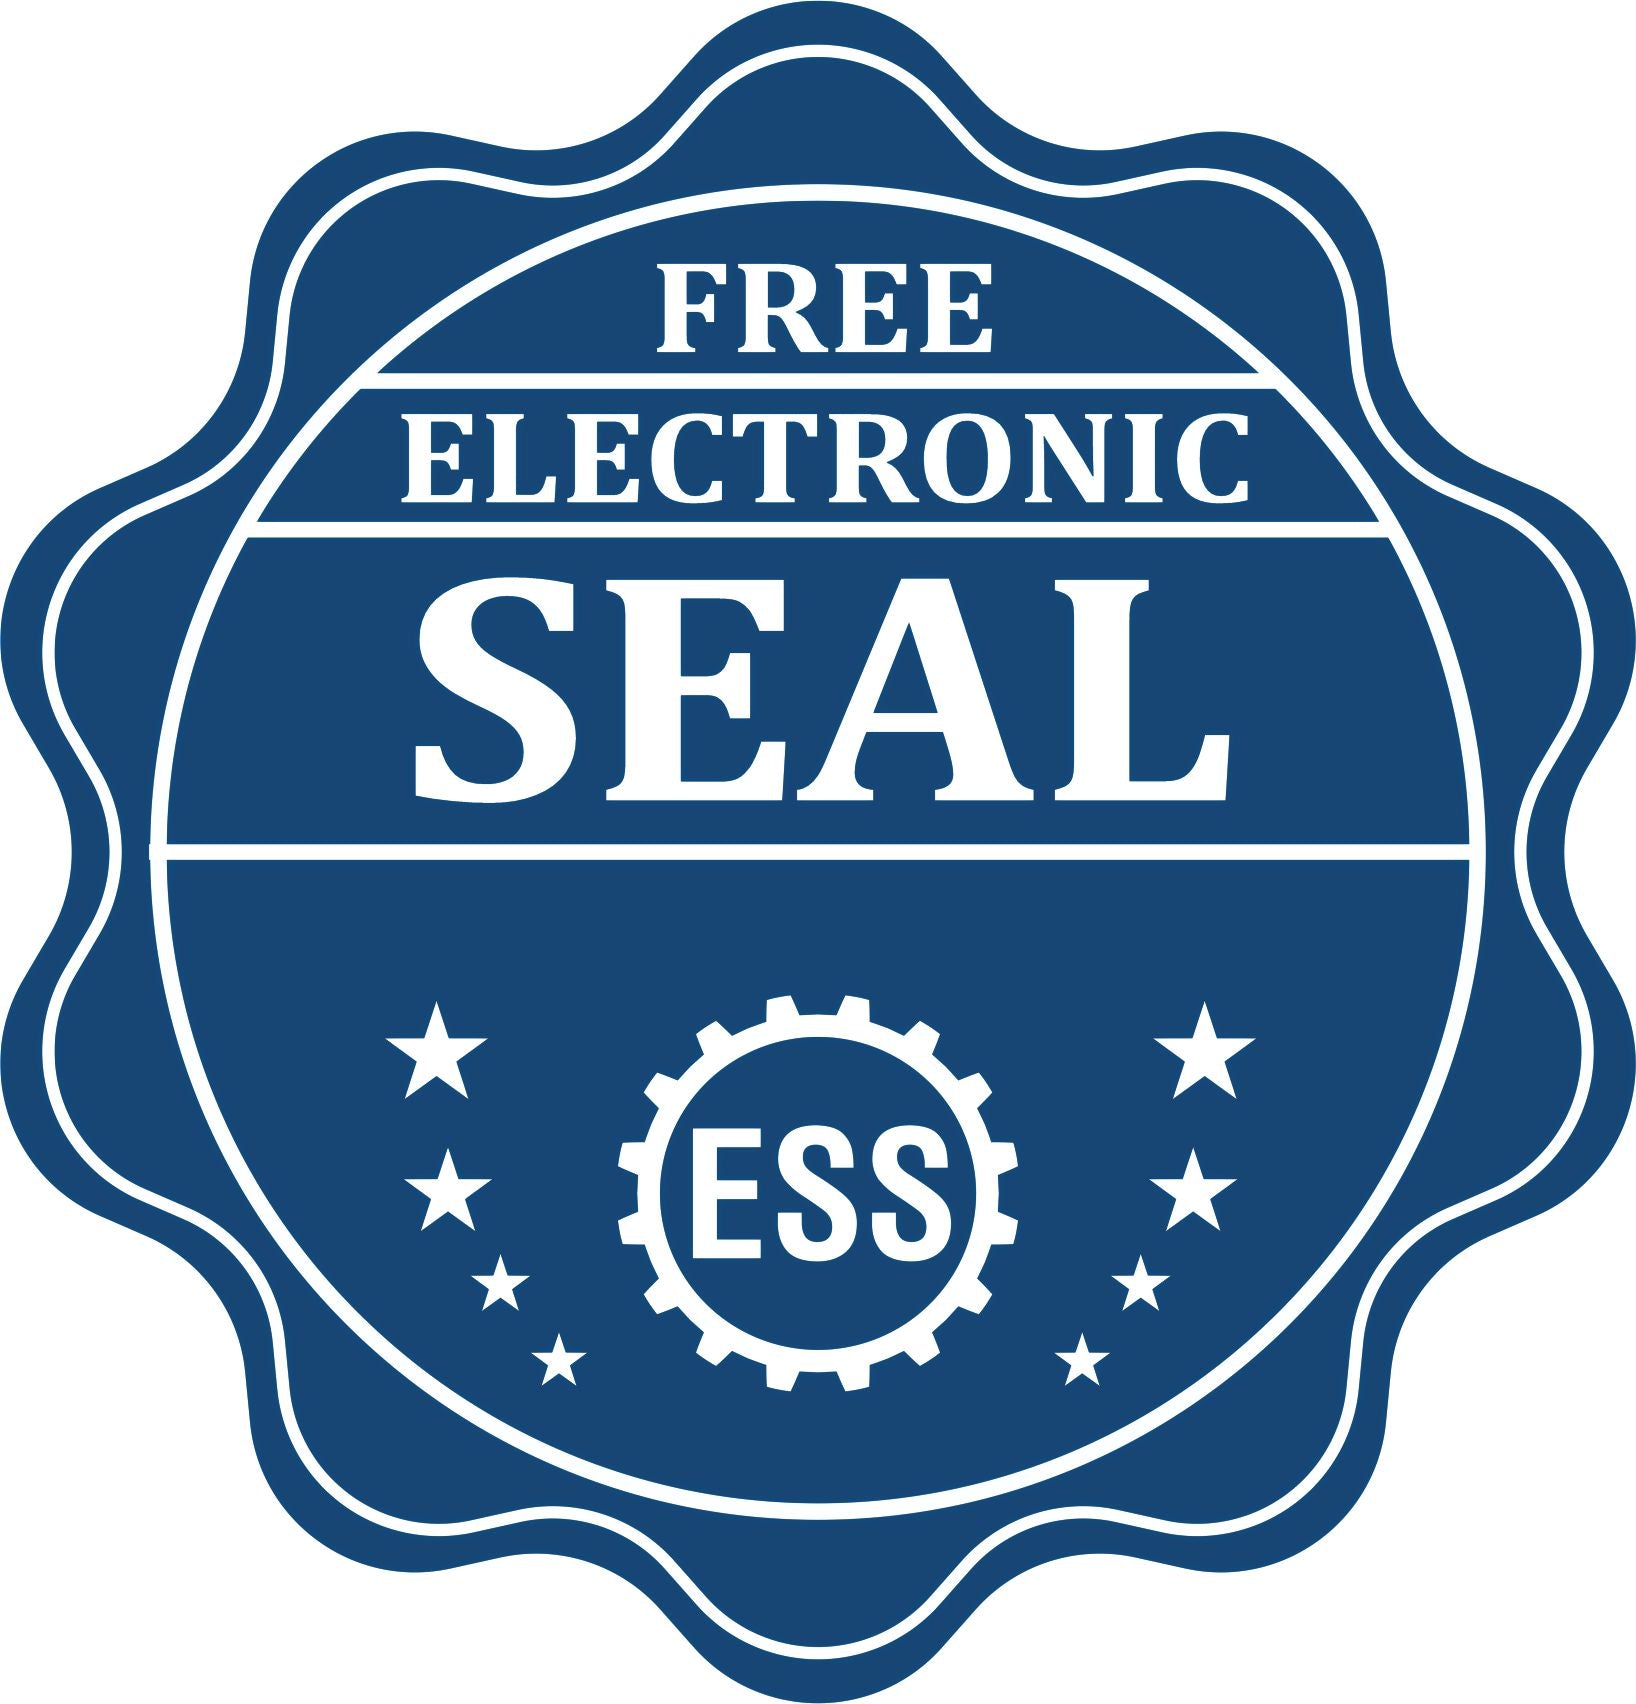 A badge showing a free electronic seal for the Heavy-Duty Oregon Rectangular Notary Stamp with stars and the ESS gear on the emblem.